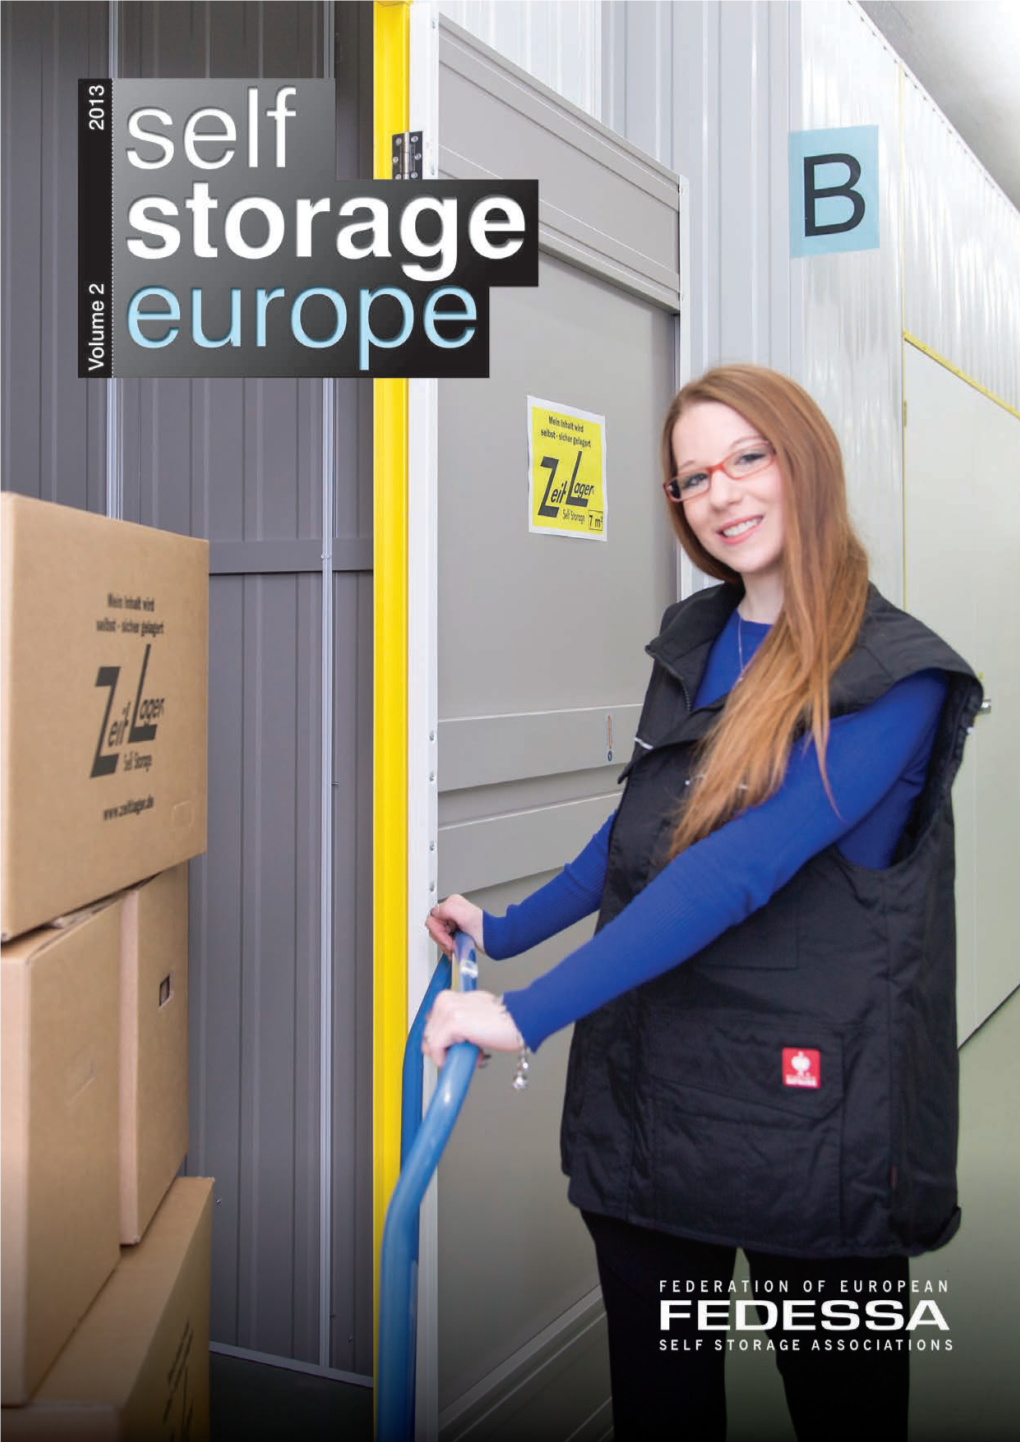 Cue the Self Storage Industry and the Demand Needed!